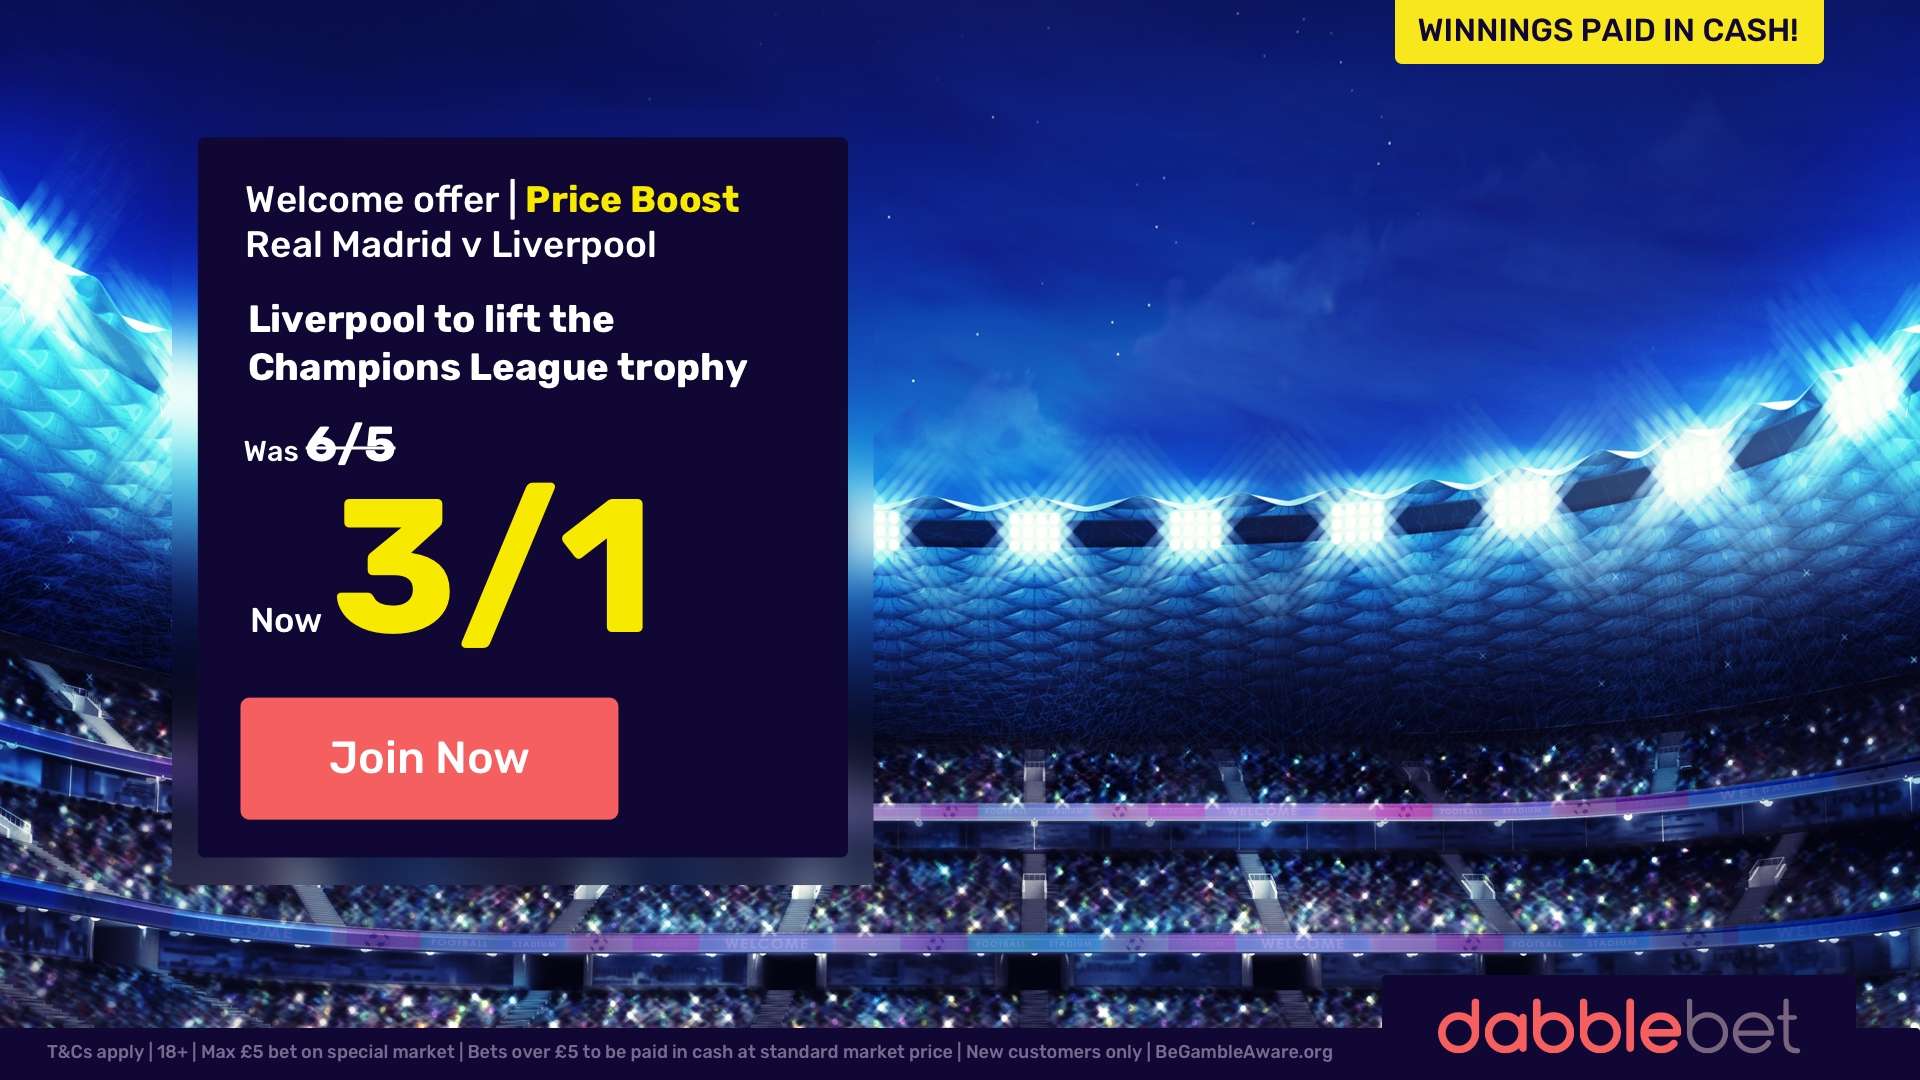 dabblebet Liverpool Champions League offer in article